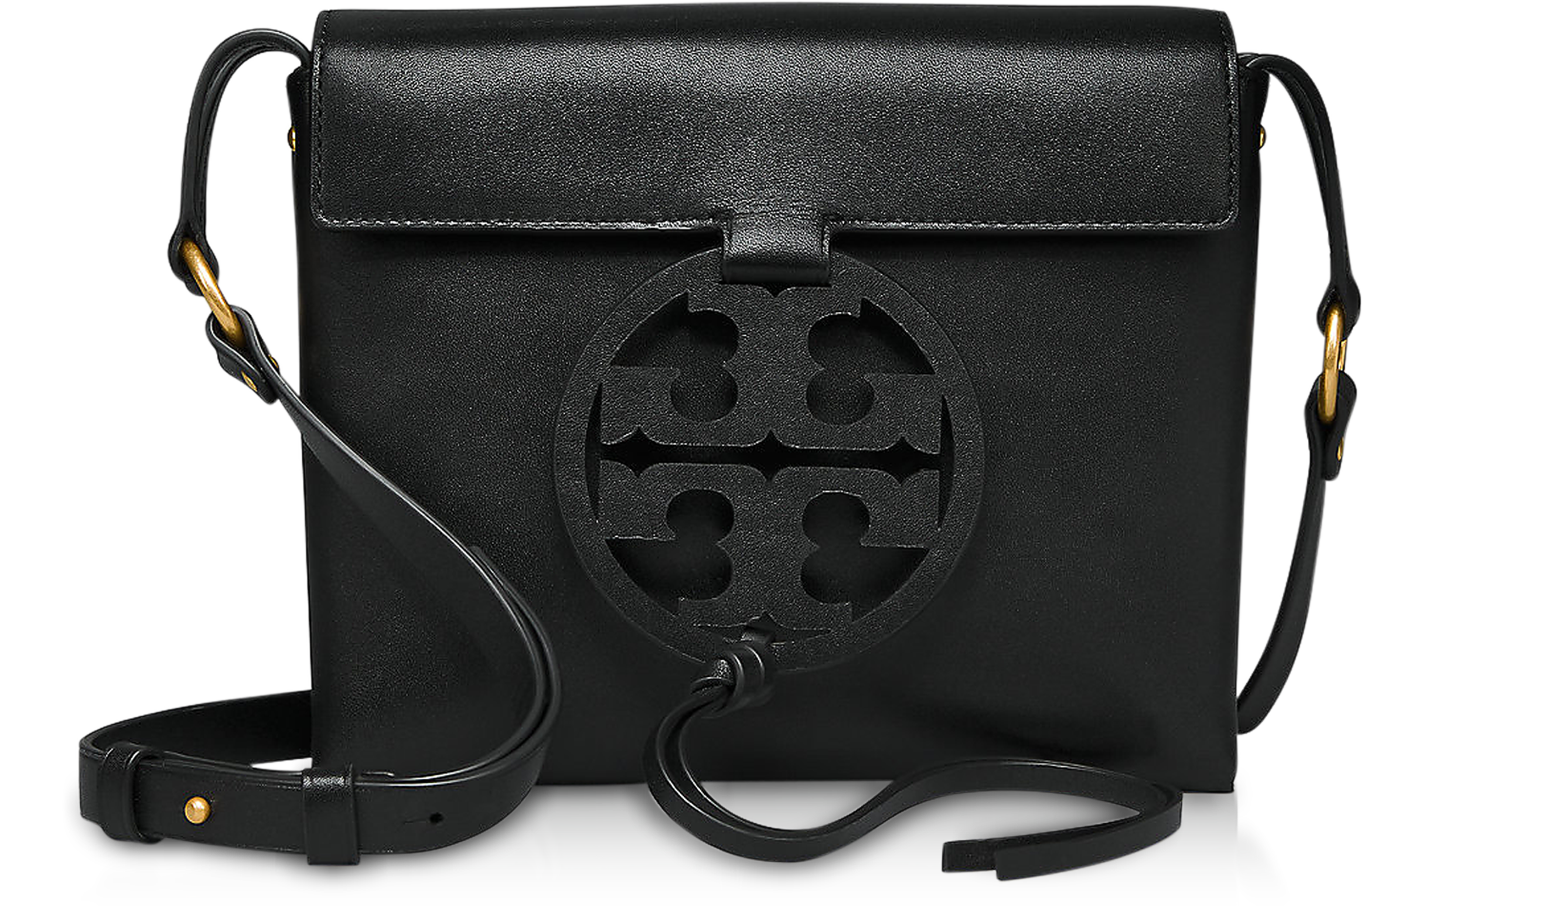 TORY BURCH: Miller bag in grained leather with logo - Black